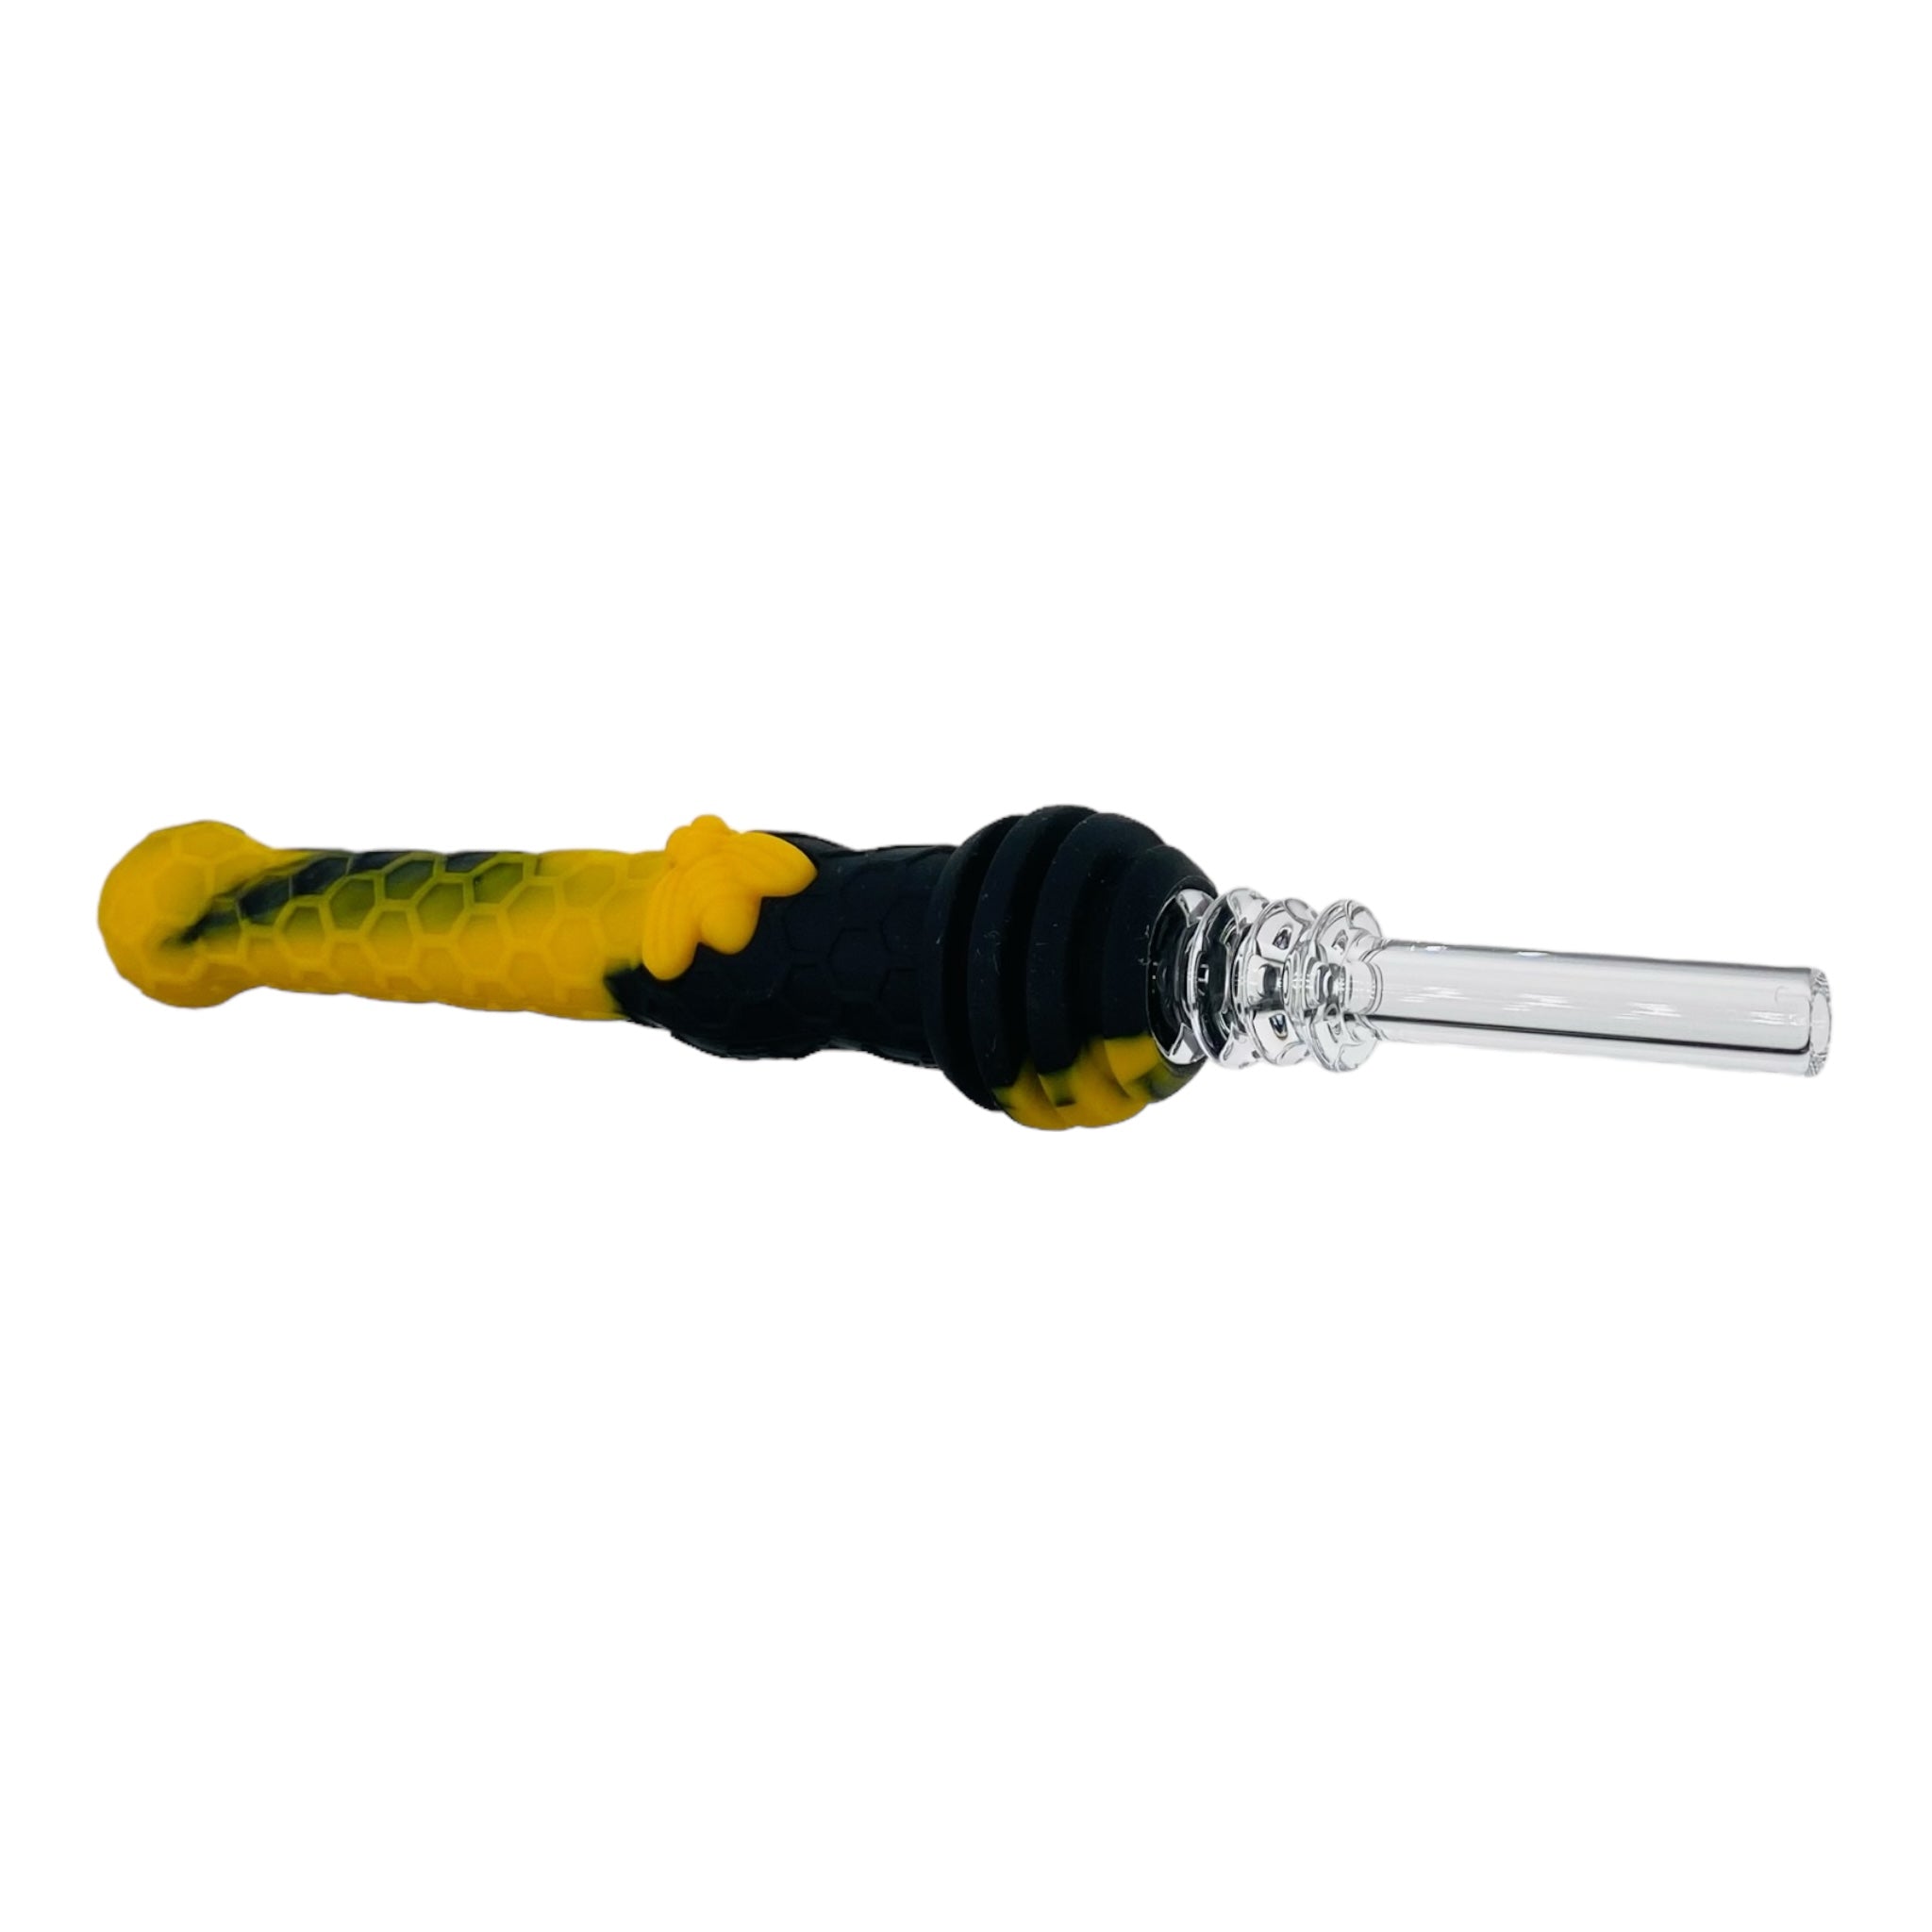 Silicone Nectar Collector With Quartz Tip 14mm Black And Yellow With Honeybee